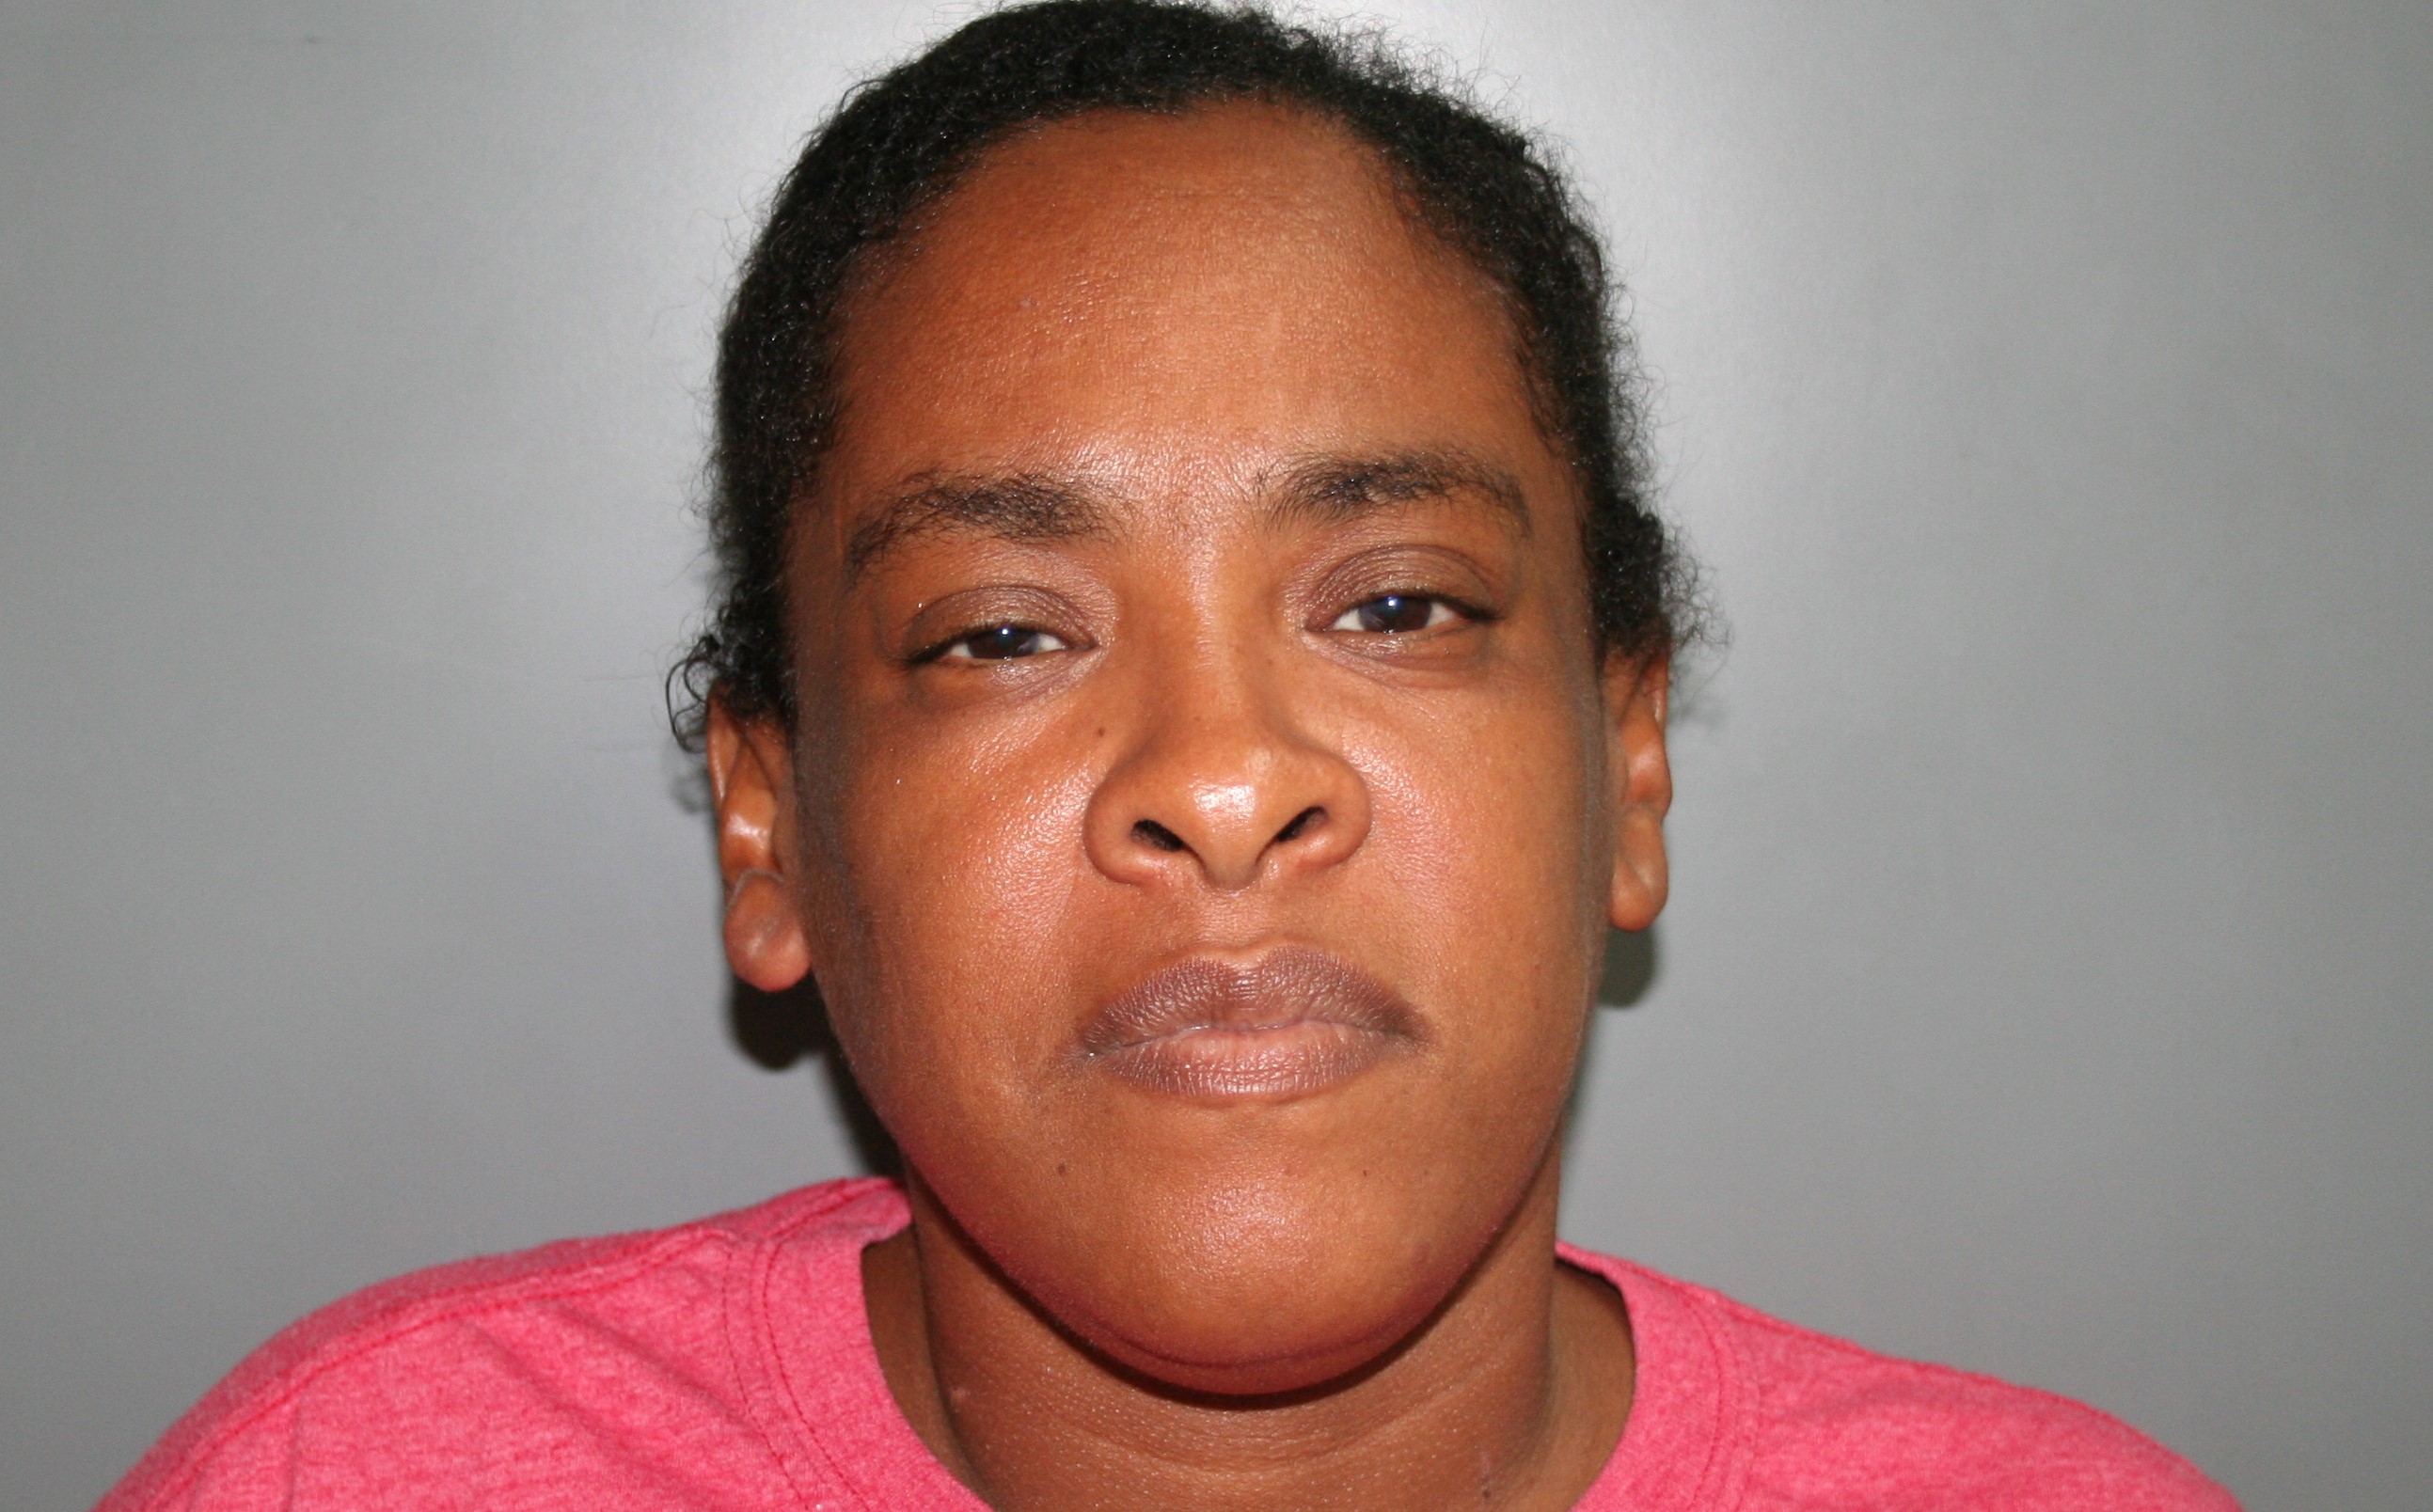 St. Croix's Janet Santiago Allegedly Attacks 14-Year-Old Girl With Hot Water